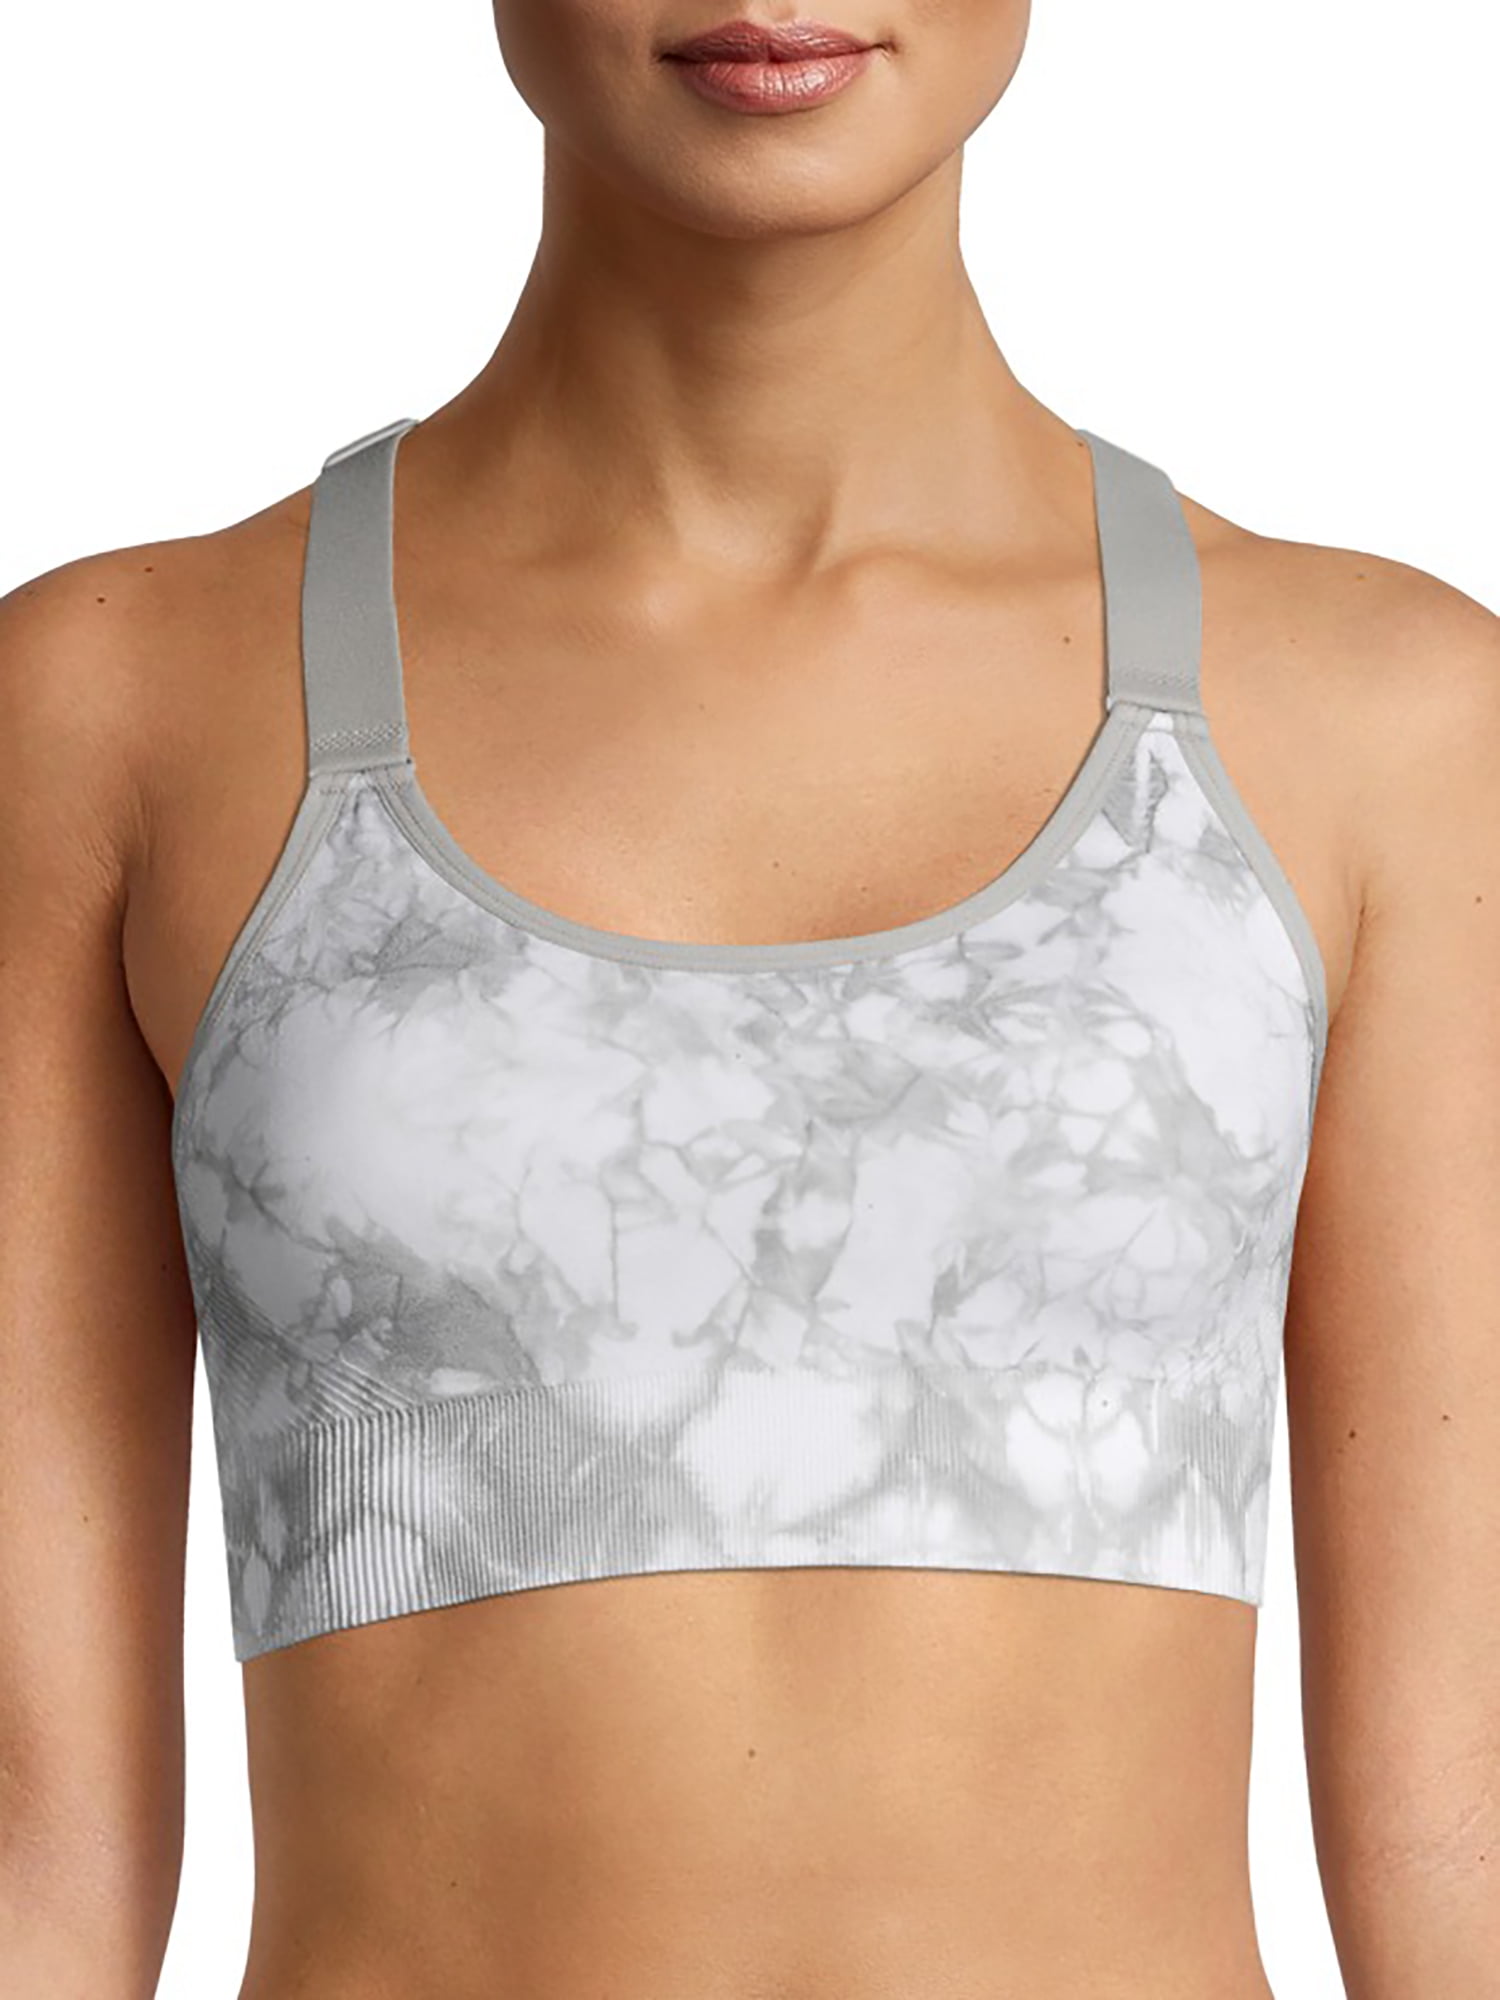 Sweat-wicking sports bra for optimal and correct grip – MissFine